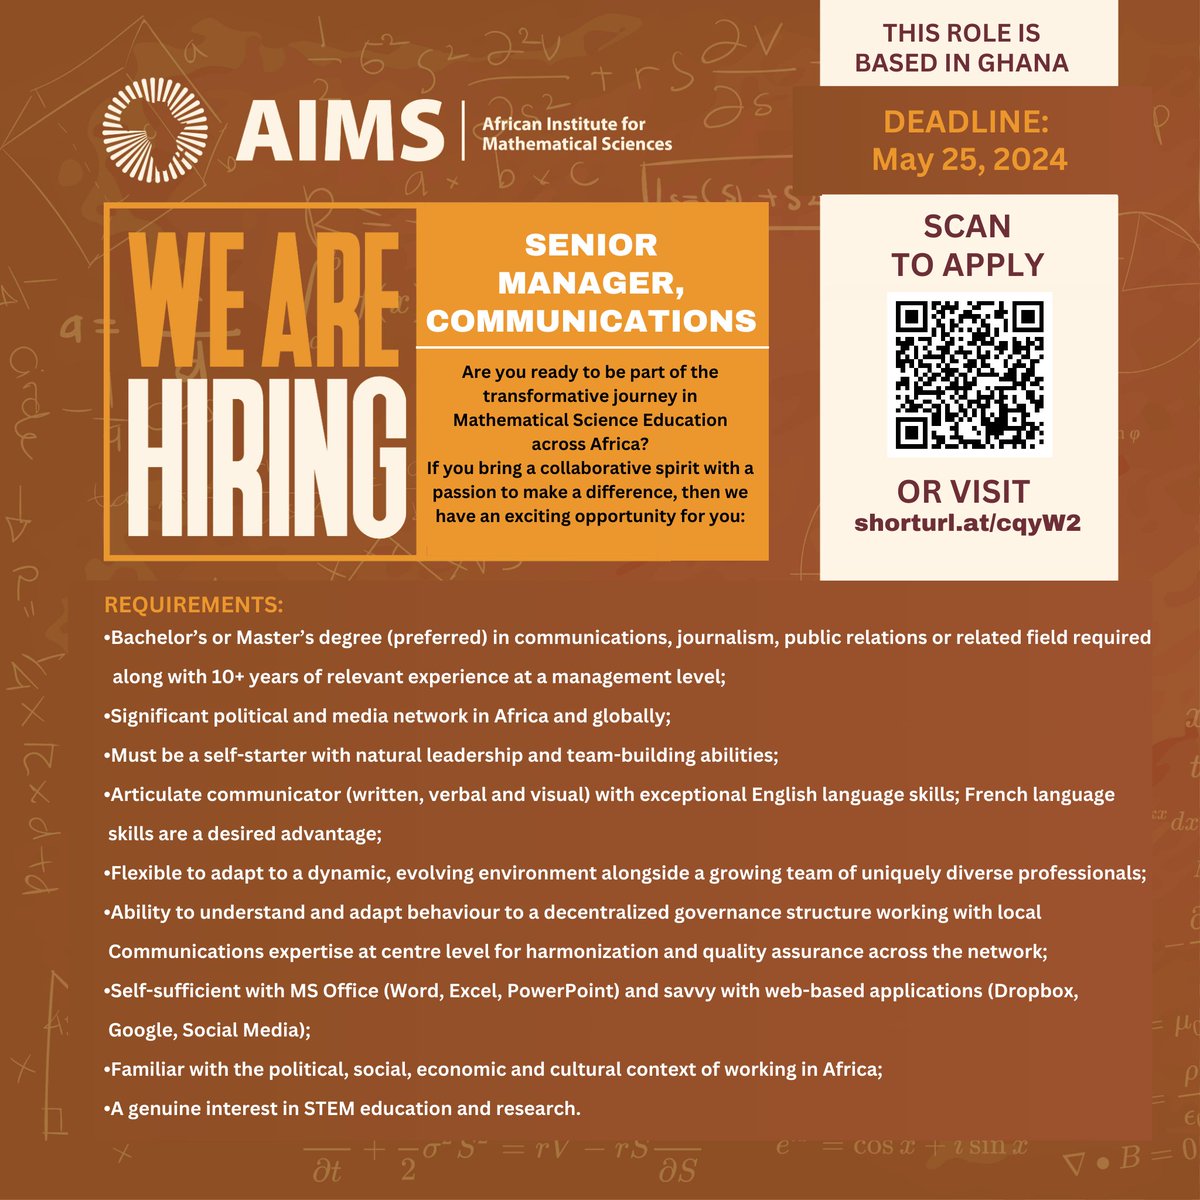 📢Calling all communication enthusiasts and design specialists, @AIMSGhana is hiring for: - Branding and Design Specialist -  Scientific Communications and Alumni Relations Coordinator -  Senior Manager, Communications For more info visit: aims.edu.gh/work-at-aims/ and #ApplyNow